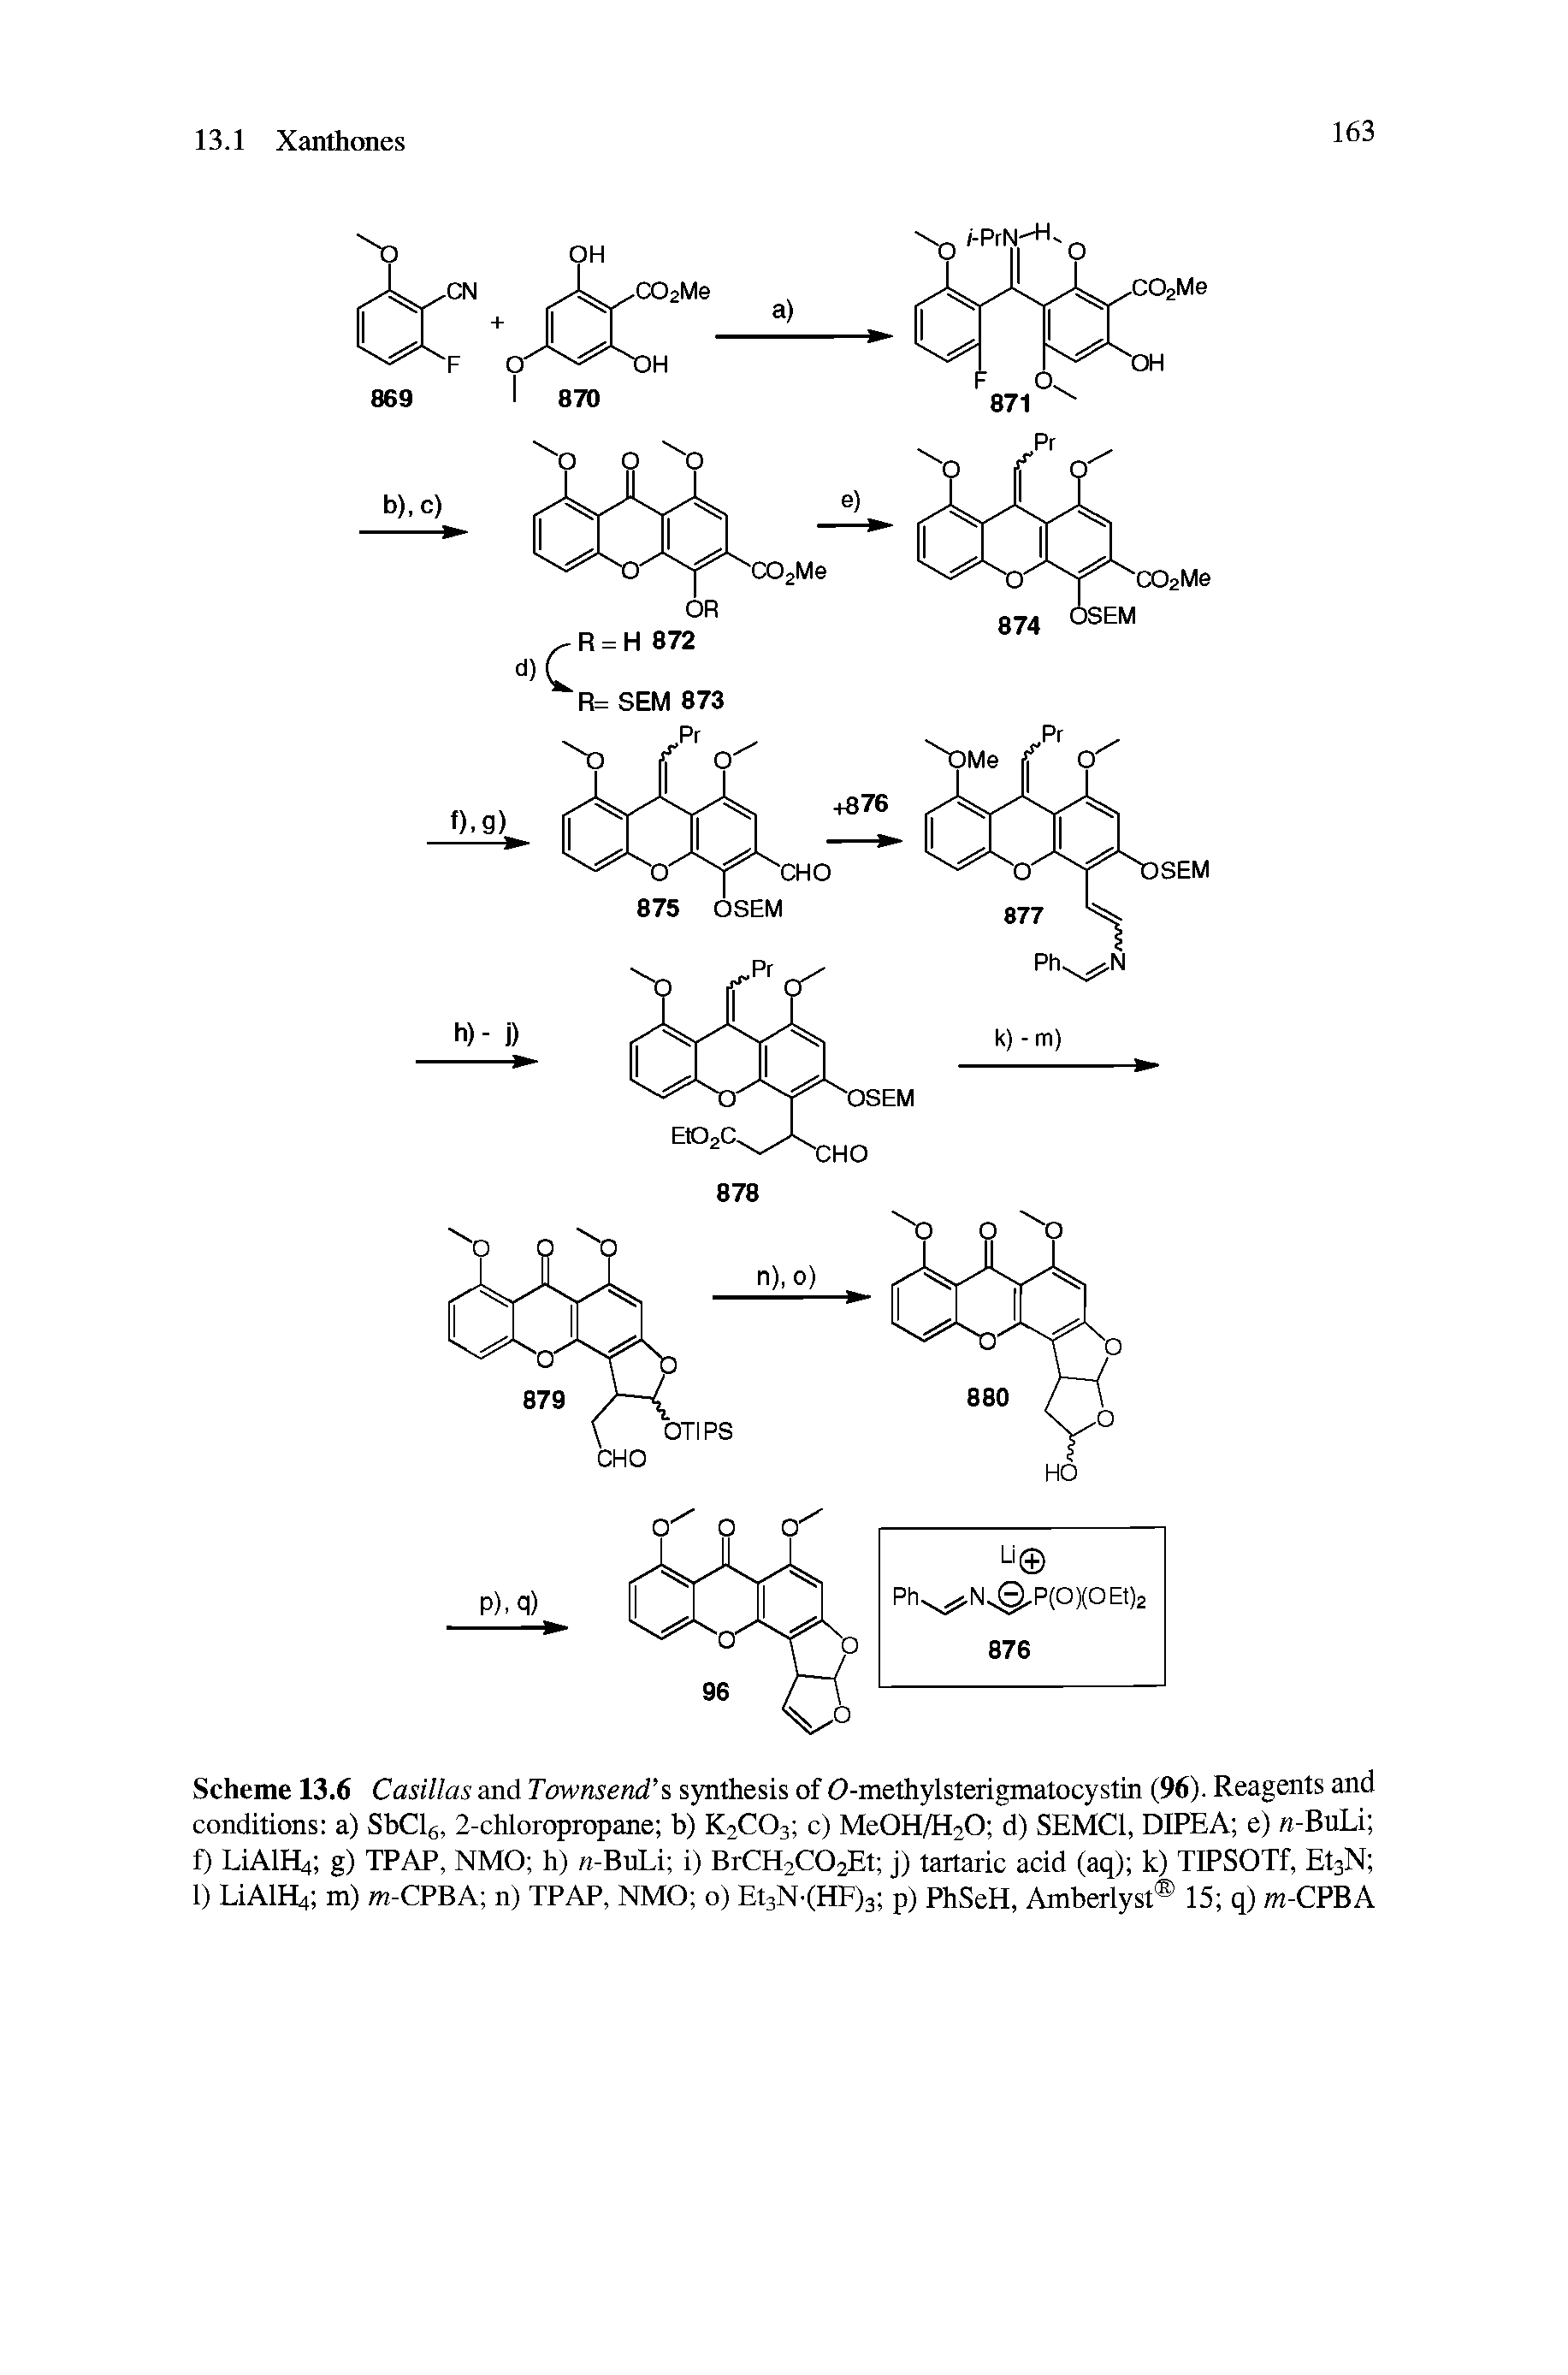 Scheme 13.6 Casillas and Townsend s synthesis of 0-methylsterigmatocystin (96). Reagents and conditions a) SbClg, 2-chloropropane b) K2CO3 c) Me0H/H20 d) SEMCl, DIPEA e) n-BuLi f) LiAlH4 g) TPAP, NMO h) n-BuLi i) BrCH2C02Et j) tartaric acid (aq) k) TIPSOTf, EtsN 1) LiAlH4 m) m-CPBA n) TPAP, NMO o) Et3N-(HP)3 p) PhSeH, Amberlyst 15 q) m-CPBA...